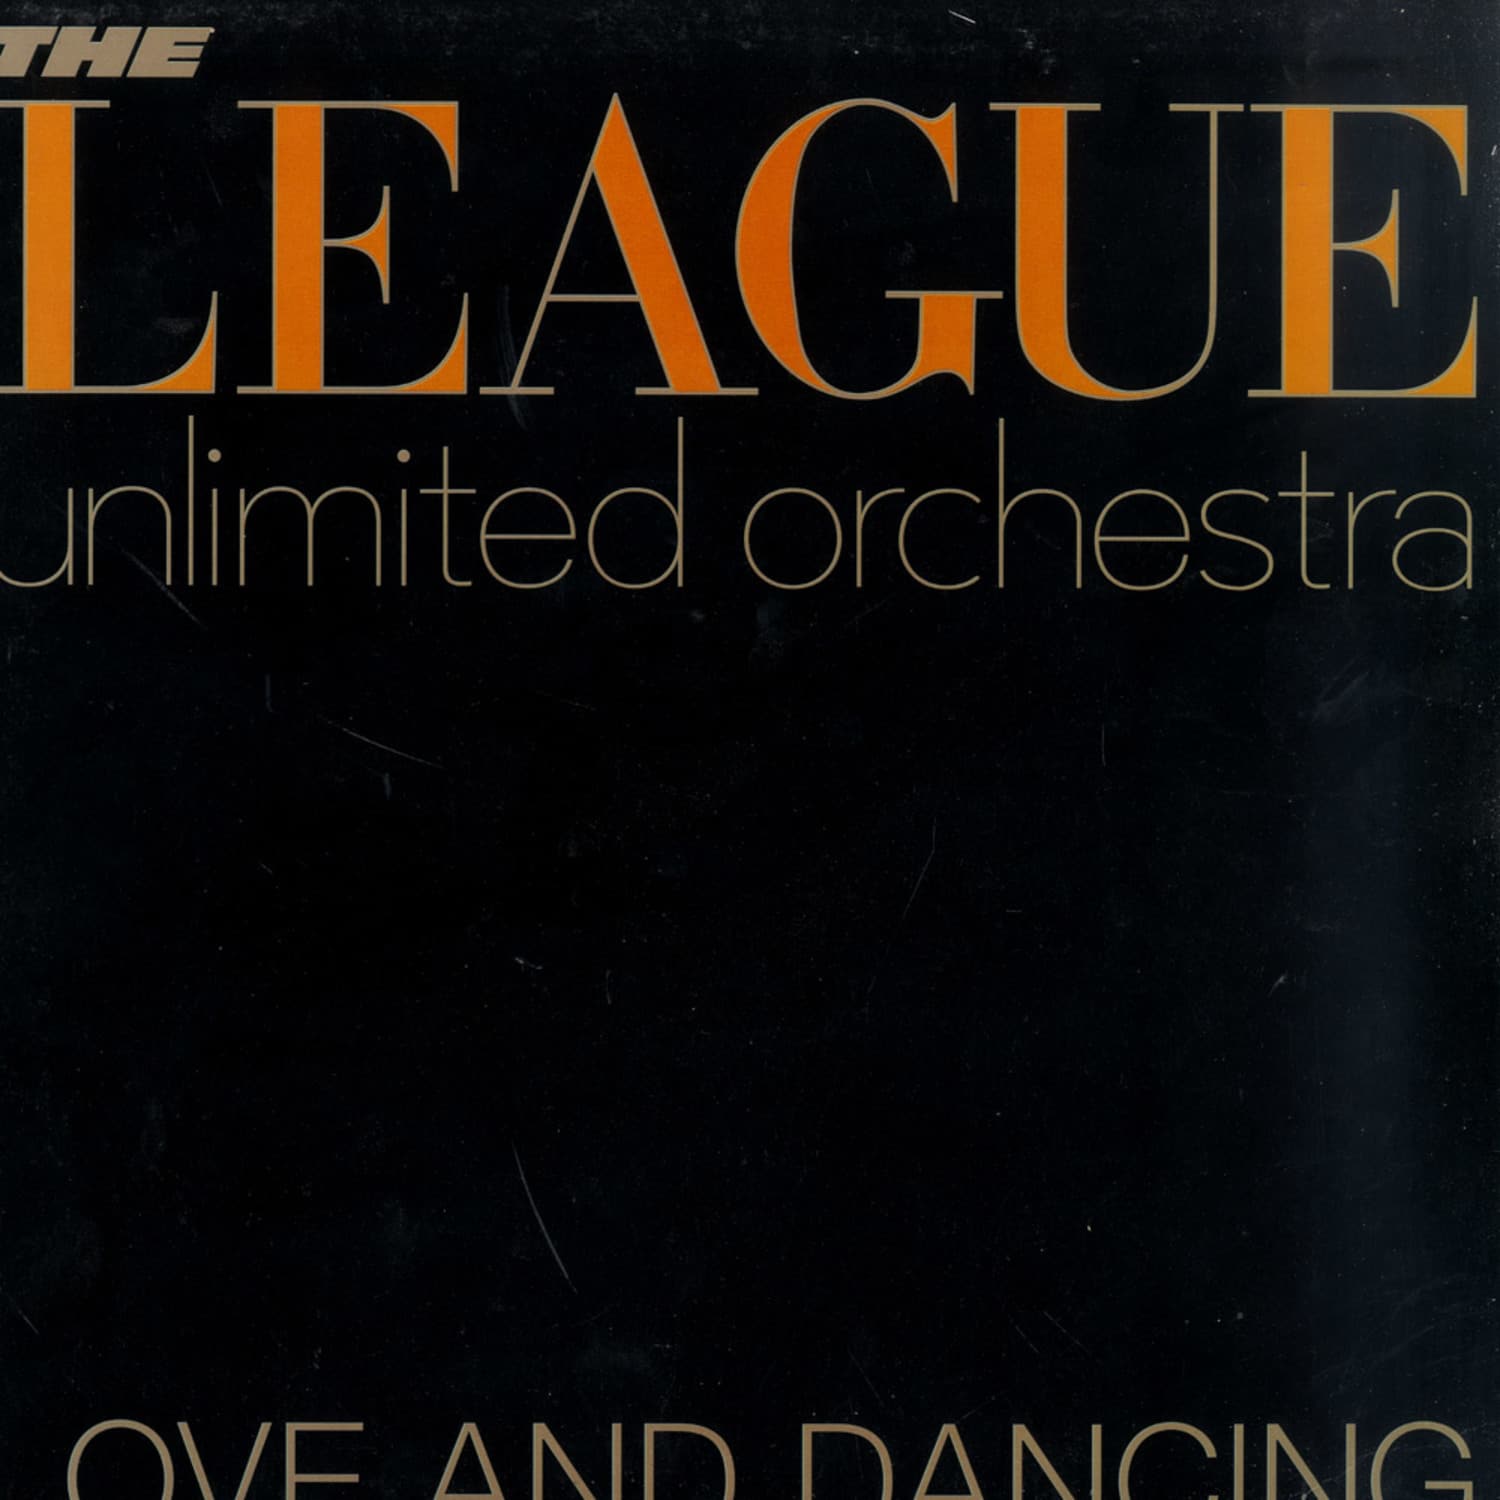 The League Unlimited Orchestra - LOVE AND DANCING